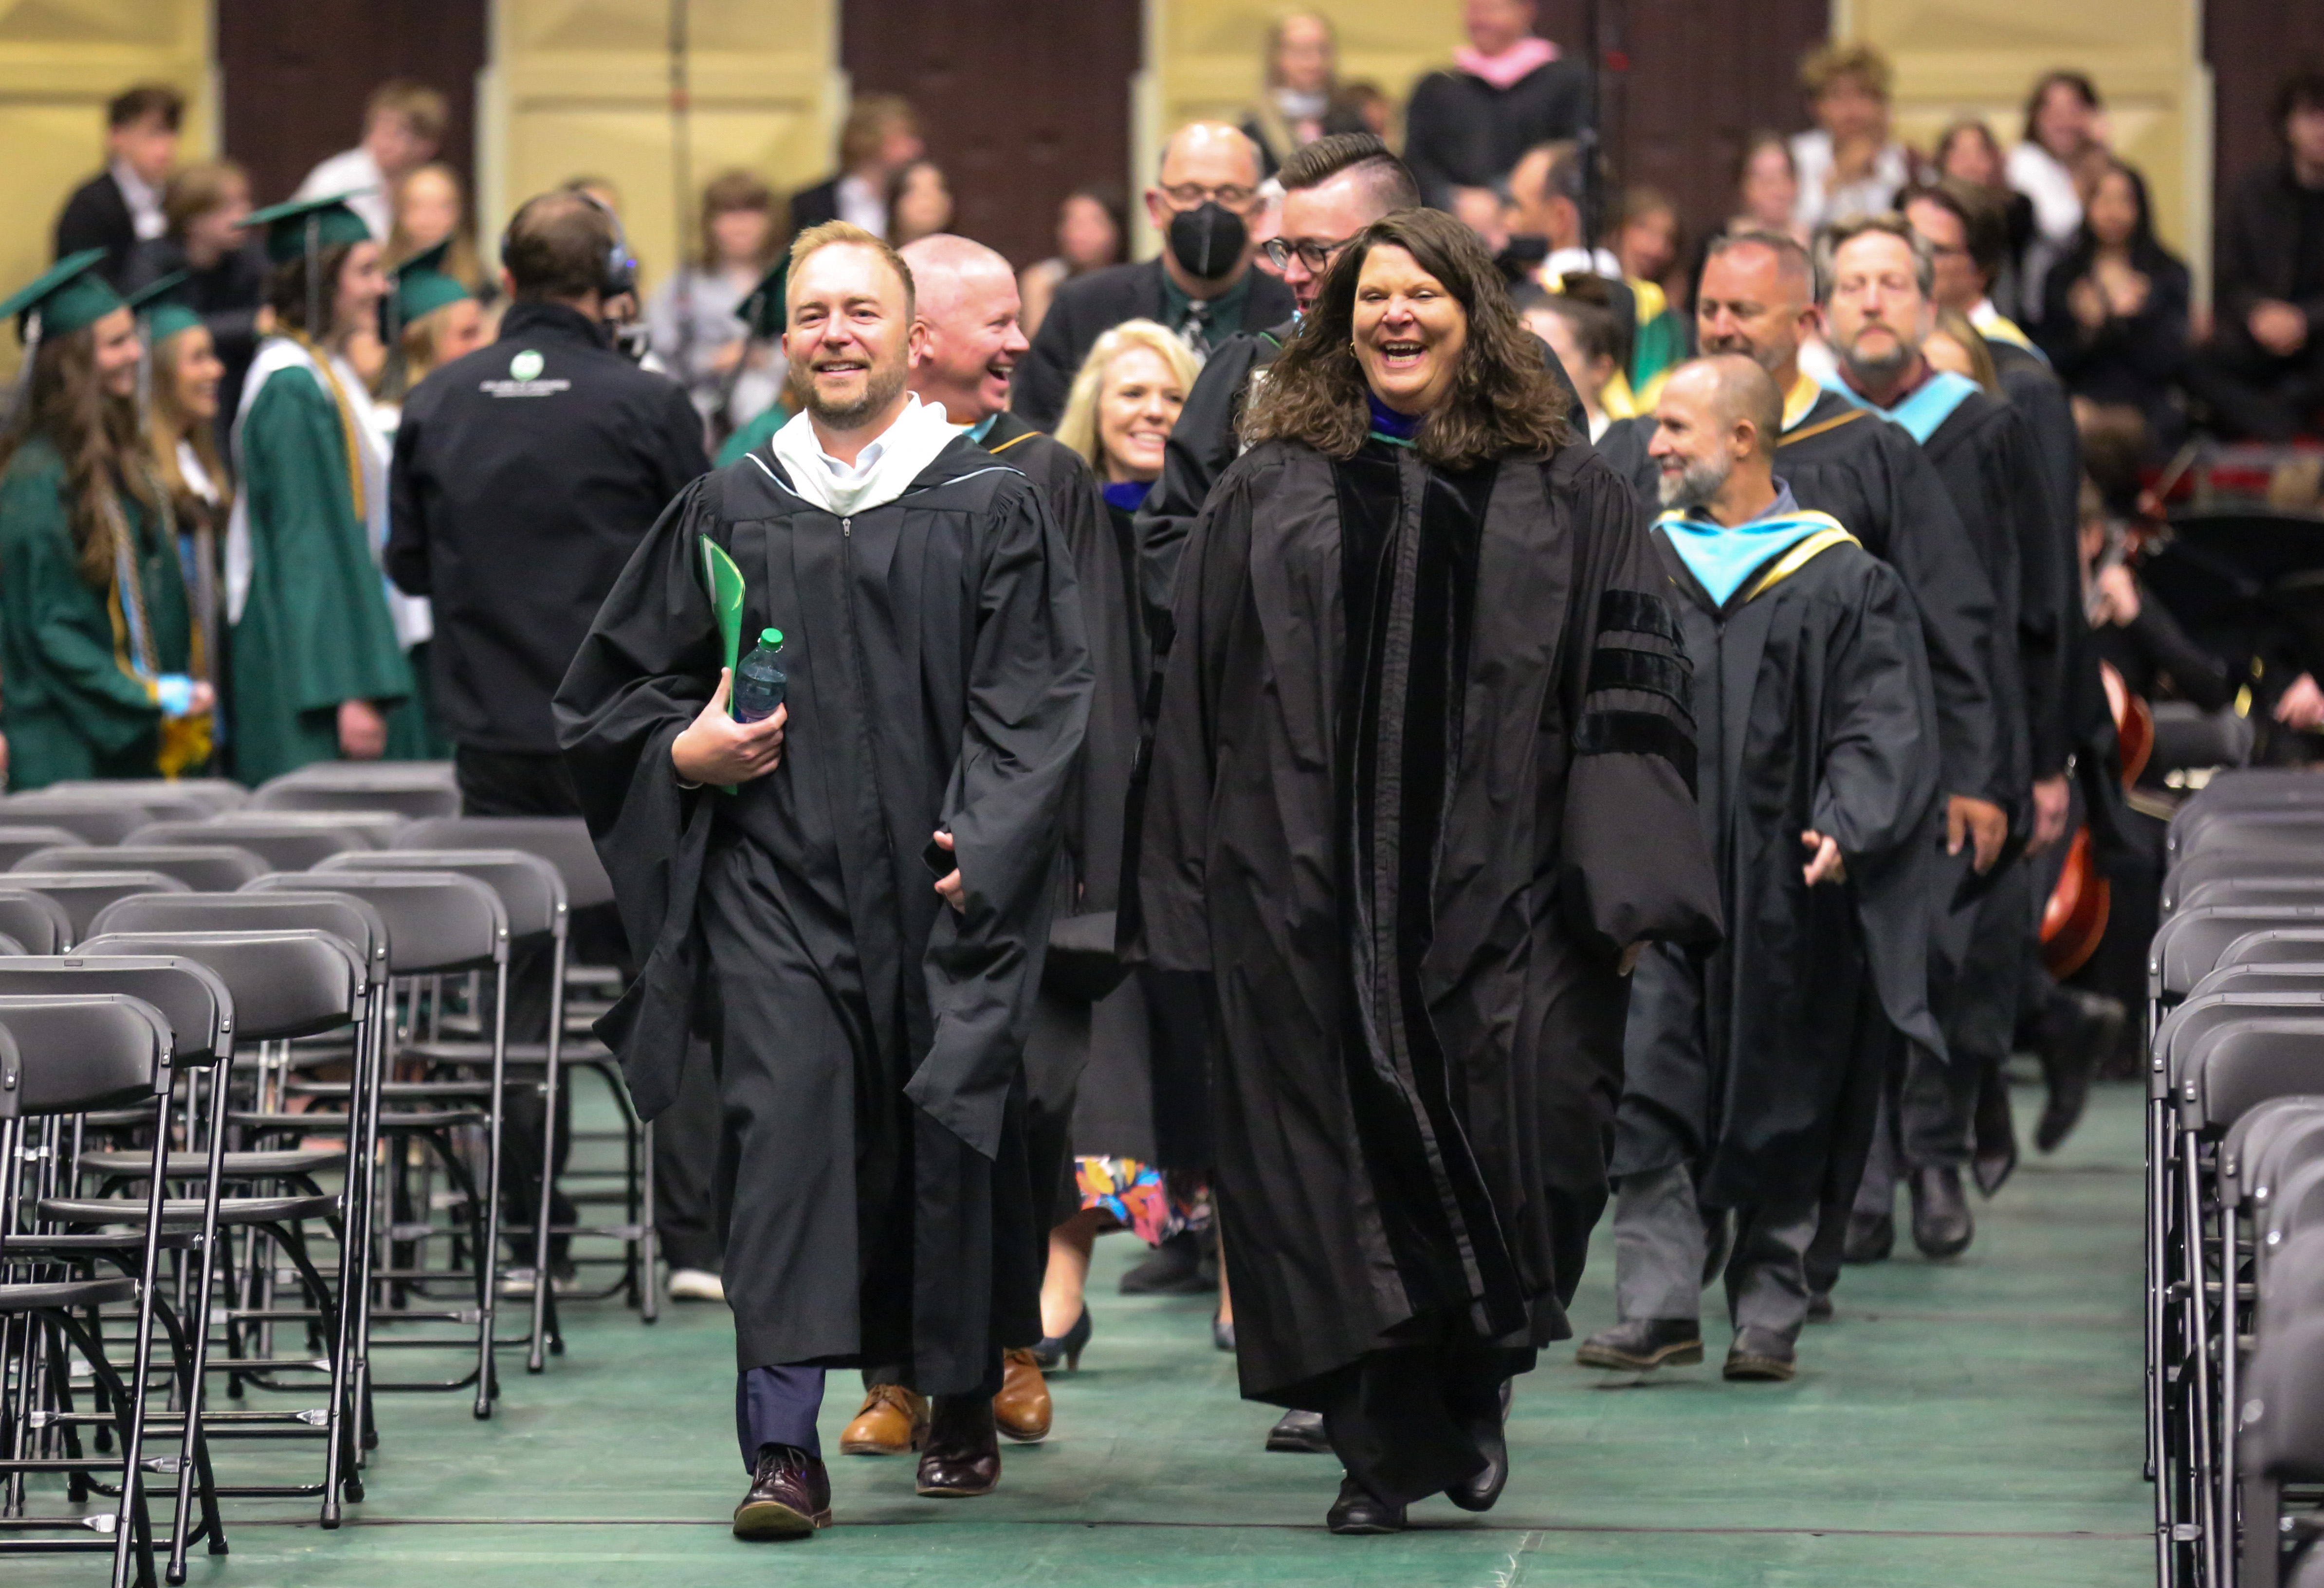 Superintendent Kingsley and the Fossil Ridge High School principal leading the walk into the graduation ceremony.